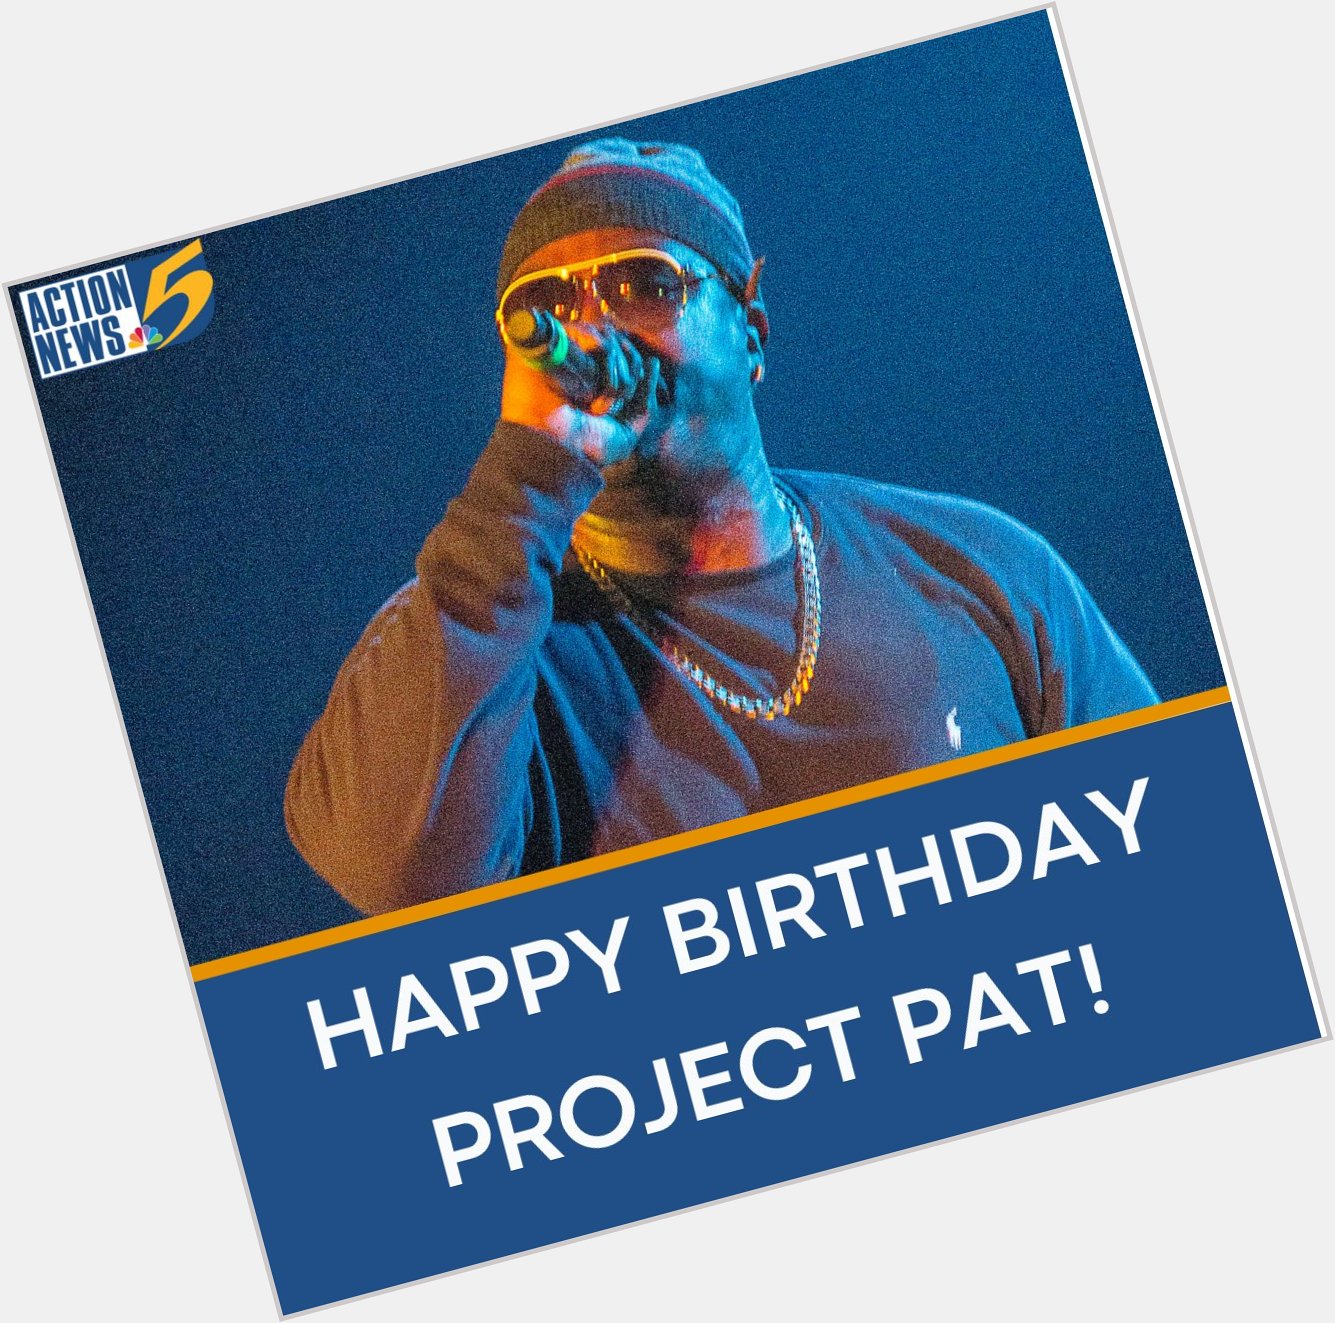 Wishing a happy birthday to Memphis rapper Project Pat! 